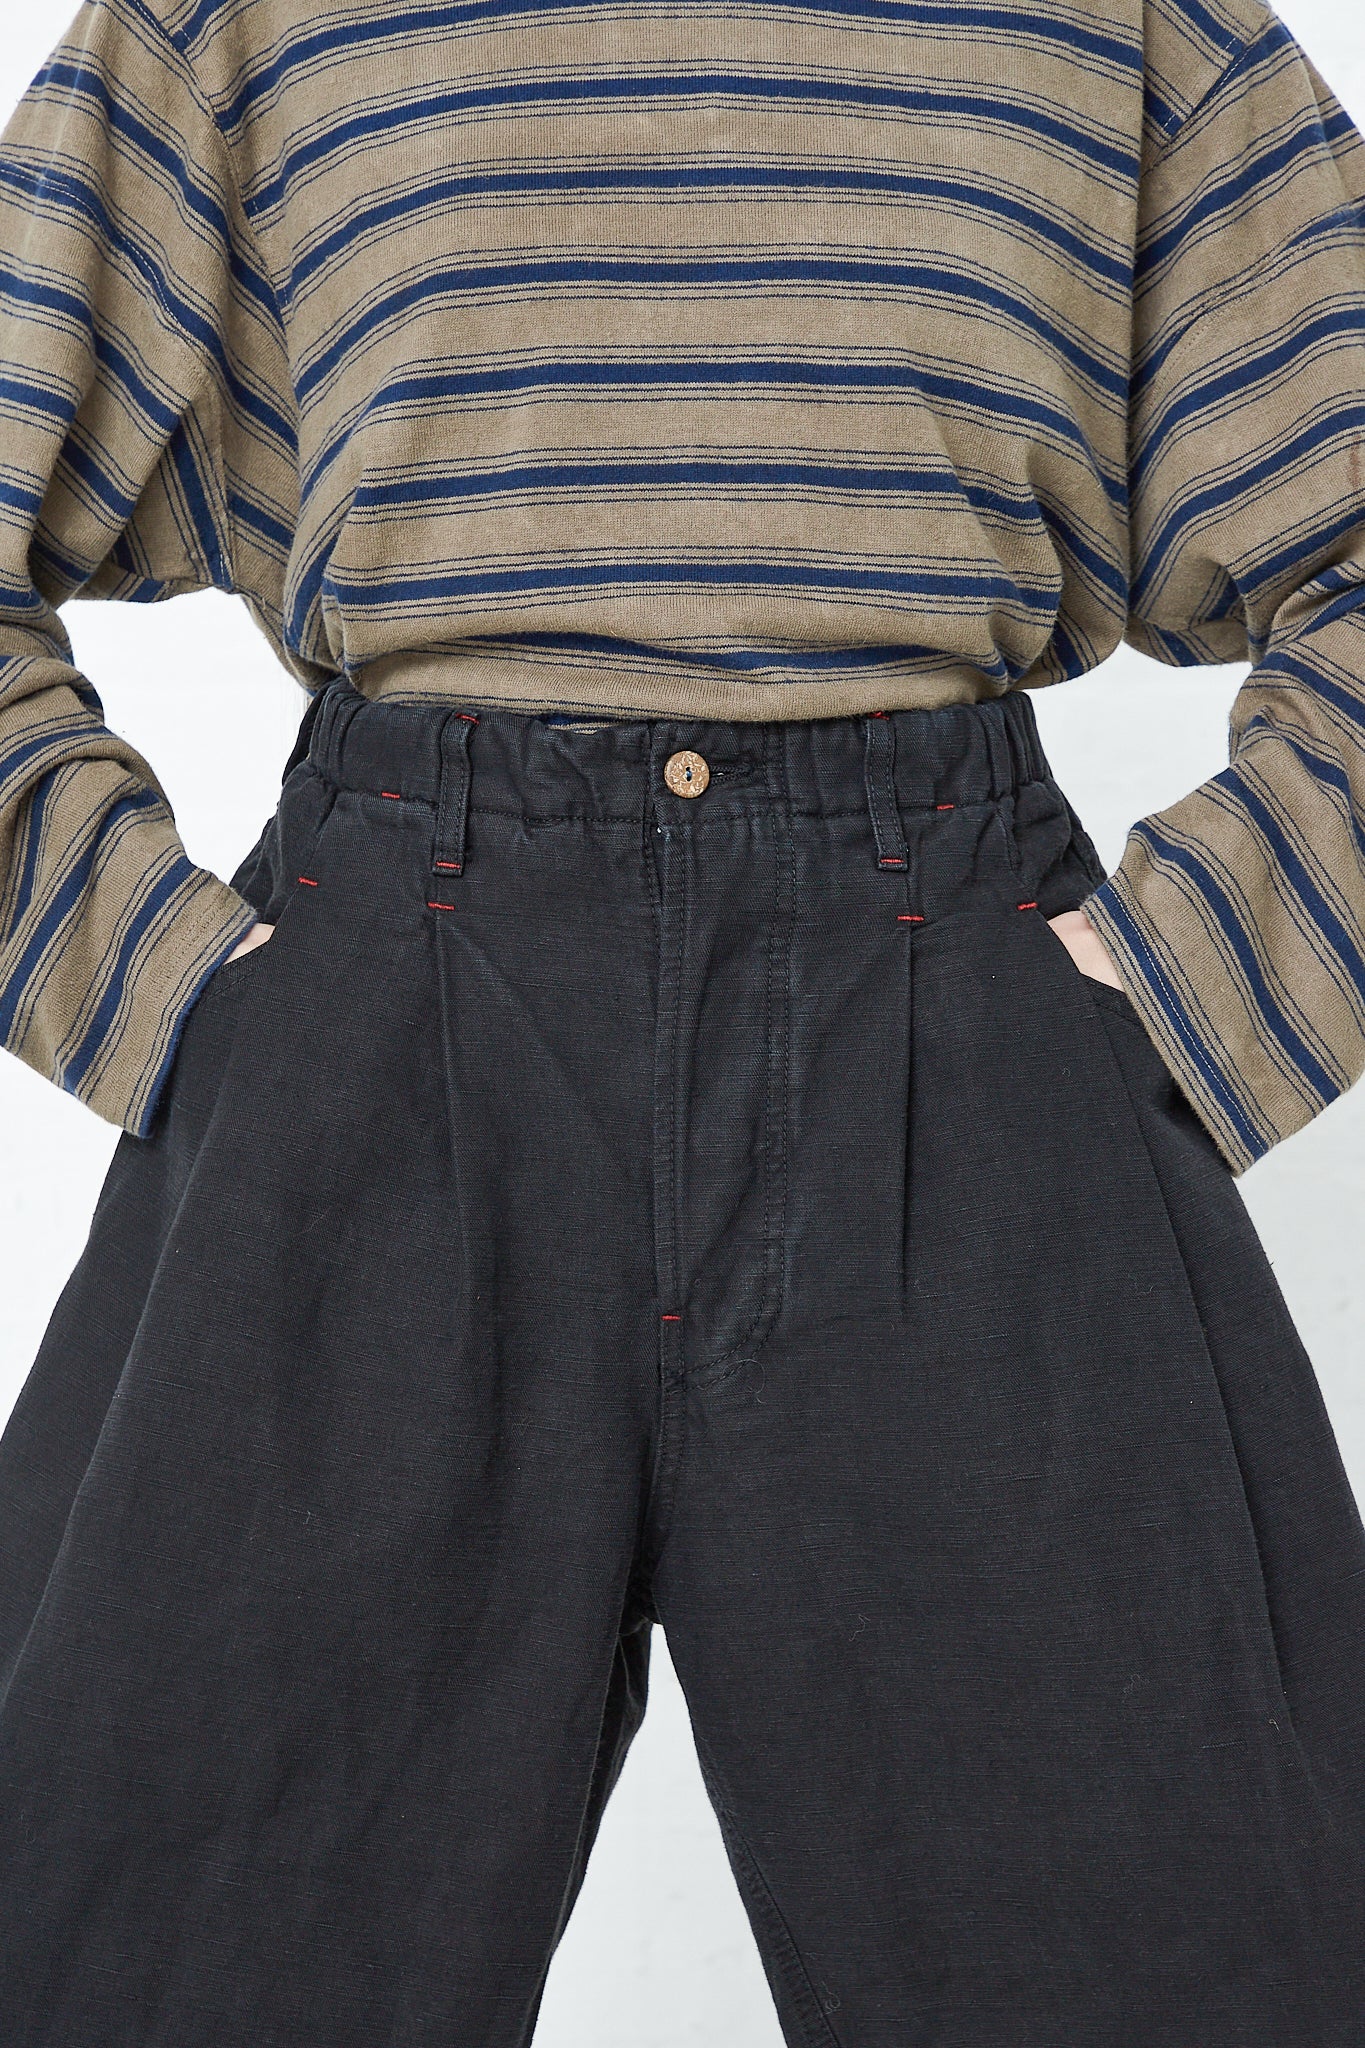 A man in Dr. Collectors' 9 oz. Cotton and Hemp P40 Z Boys Military Pant in Sulfur Black and a striped t-shirt.